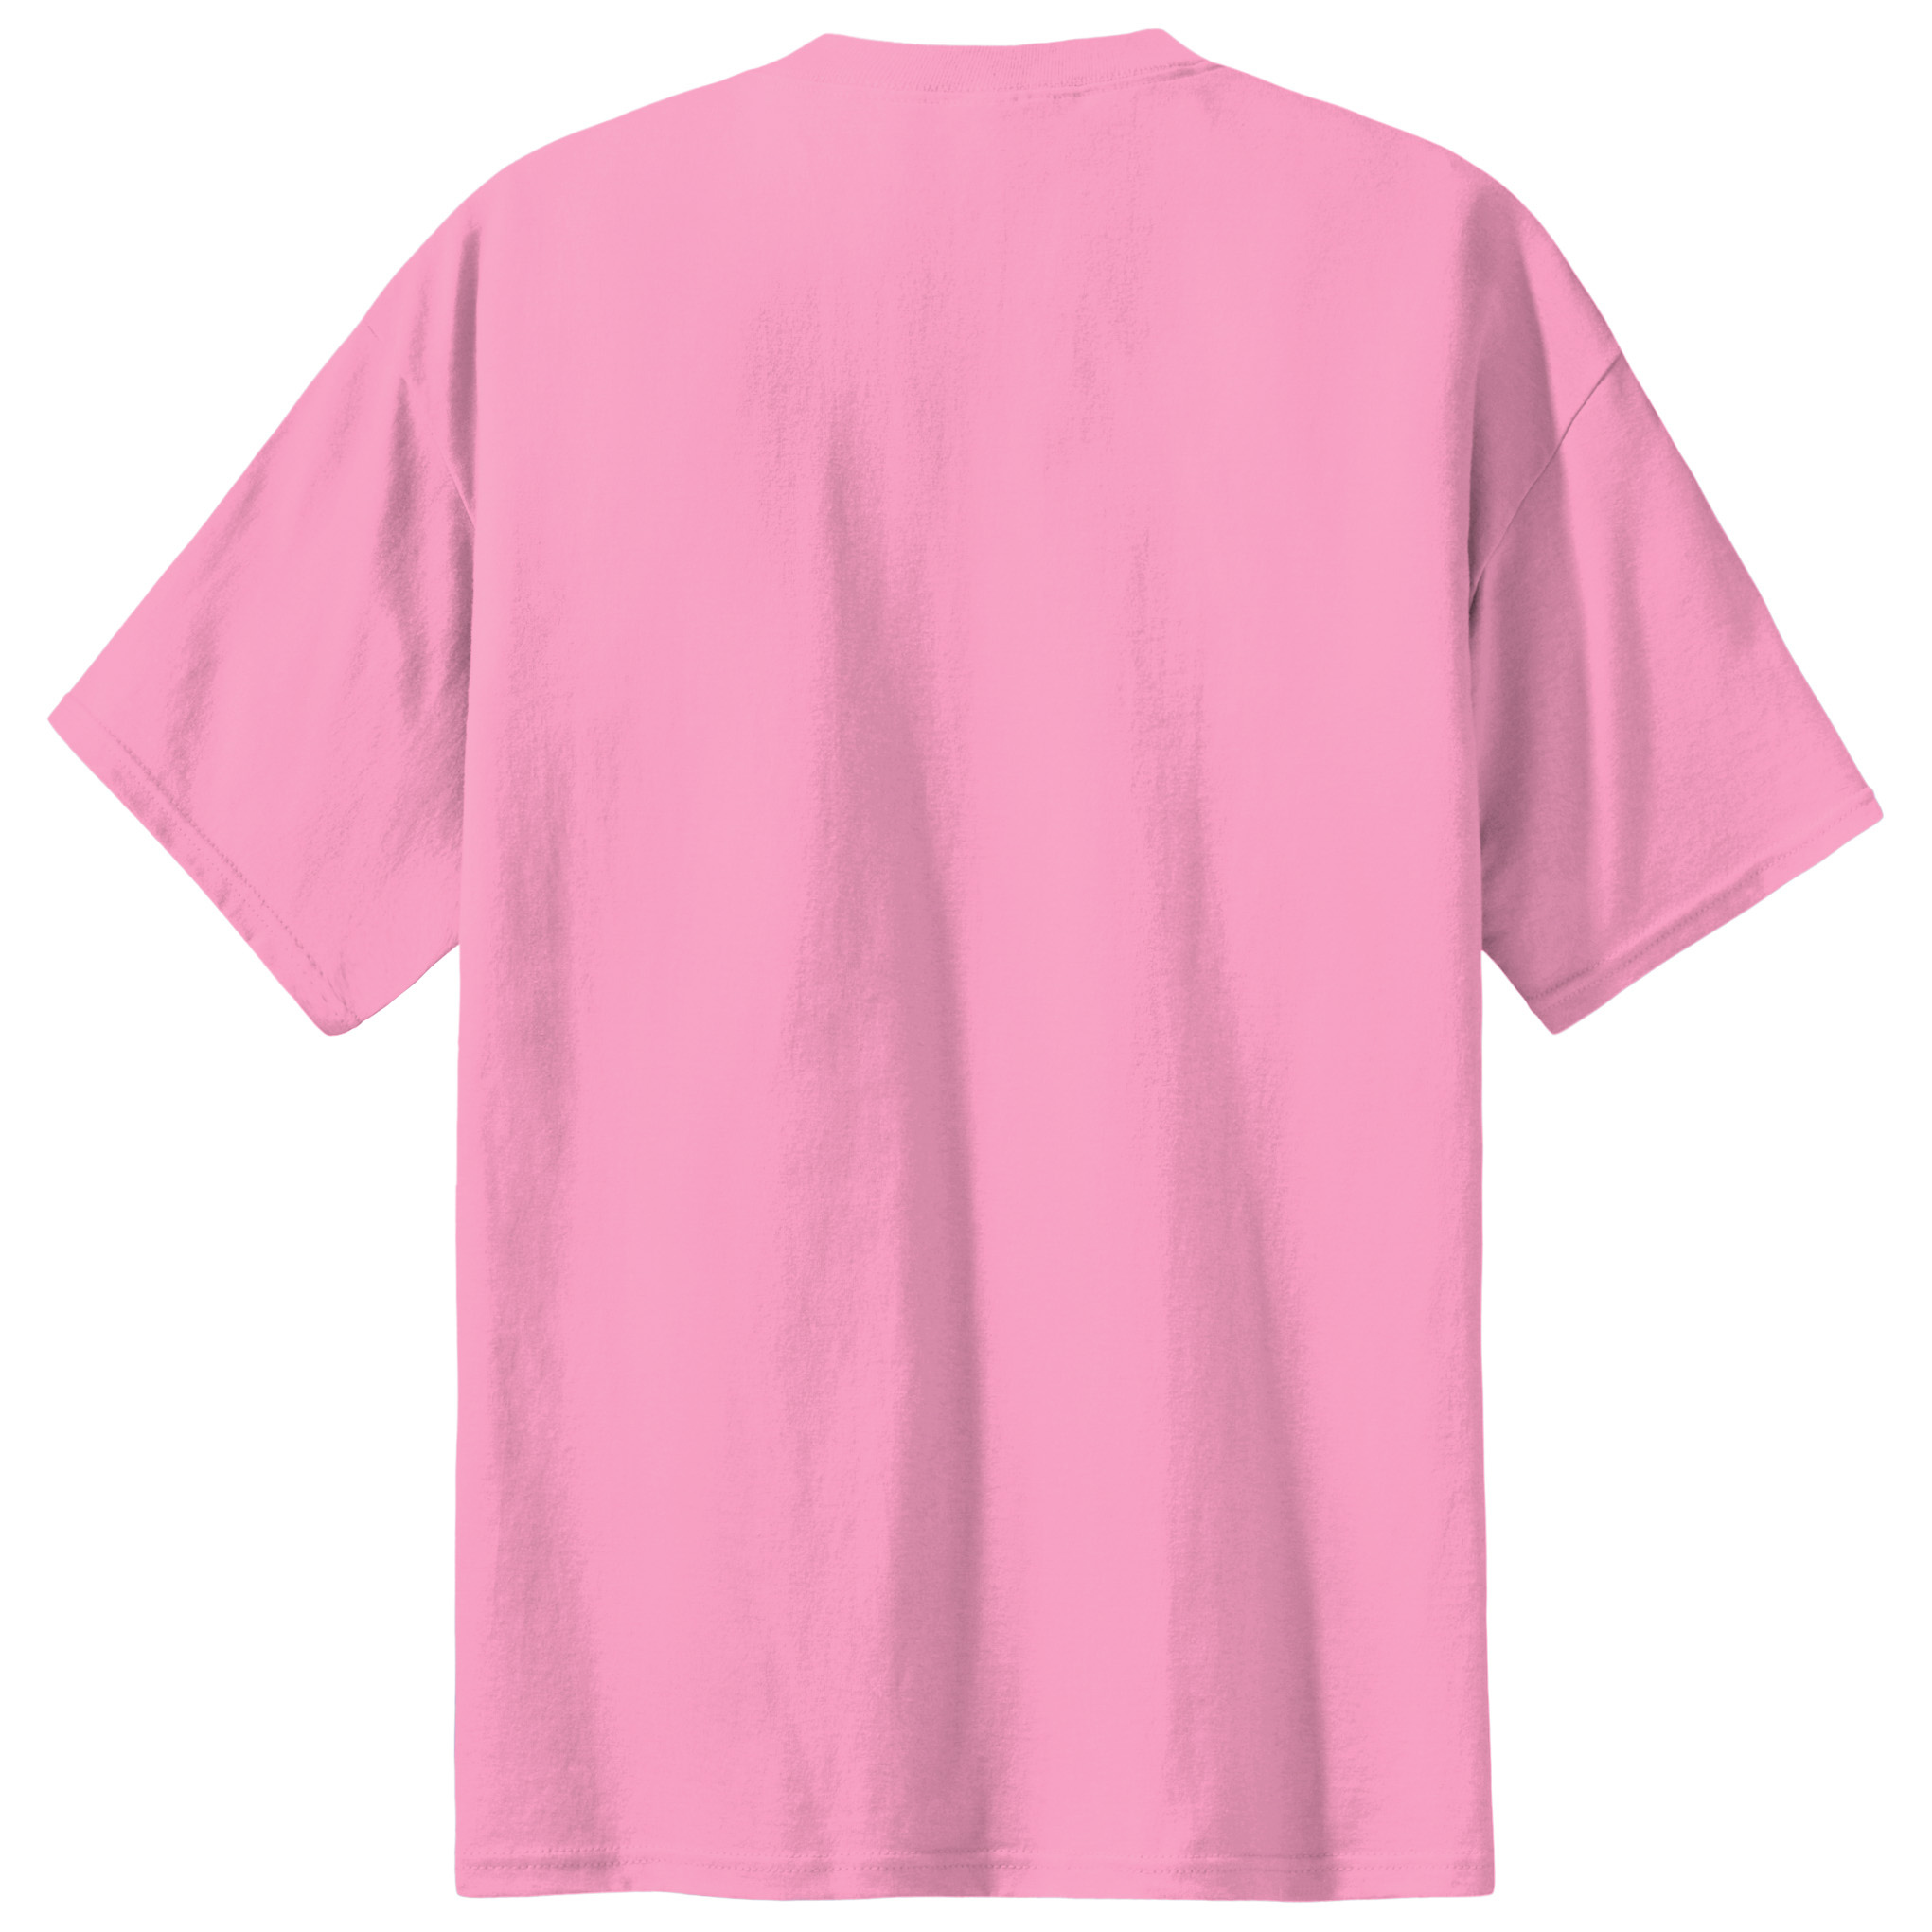 Port & Company PC61 Essential Tee - Candy Pink - 2XL